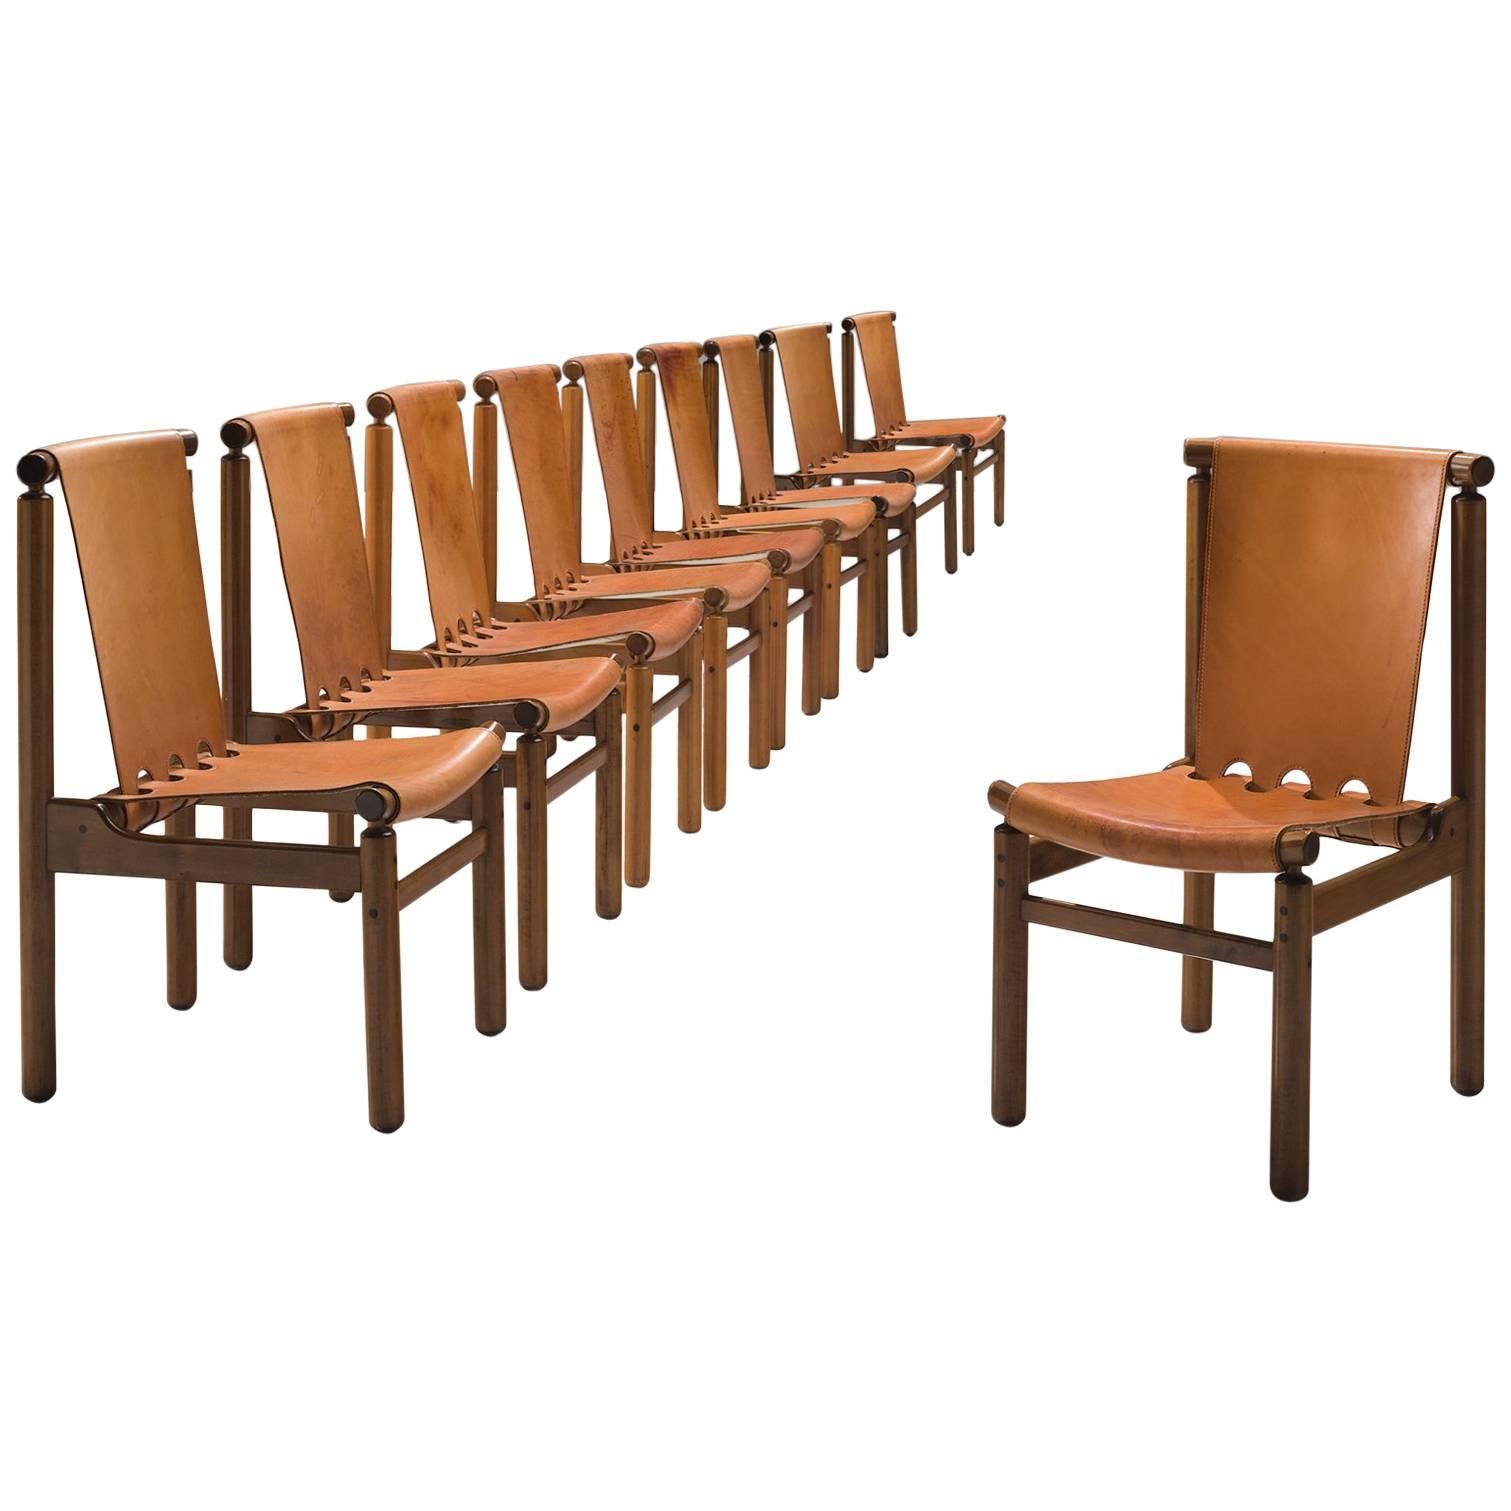 Set of Ten Dining Chairs in Cognac Leather